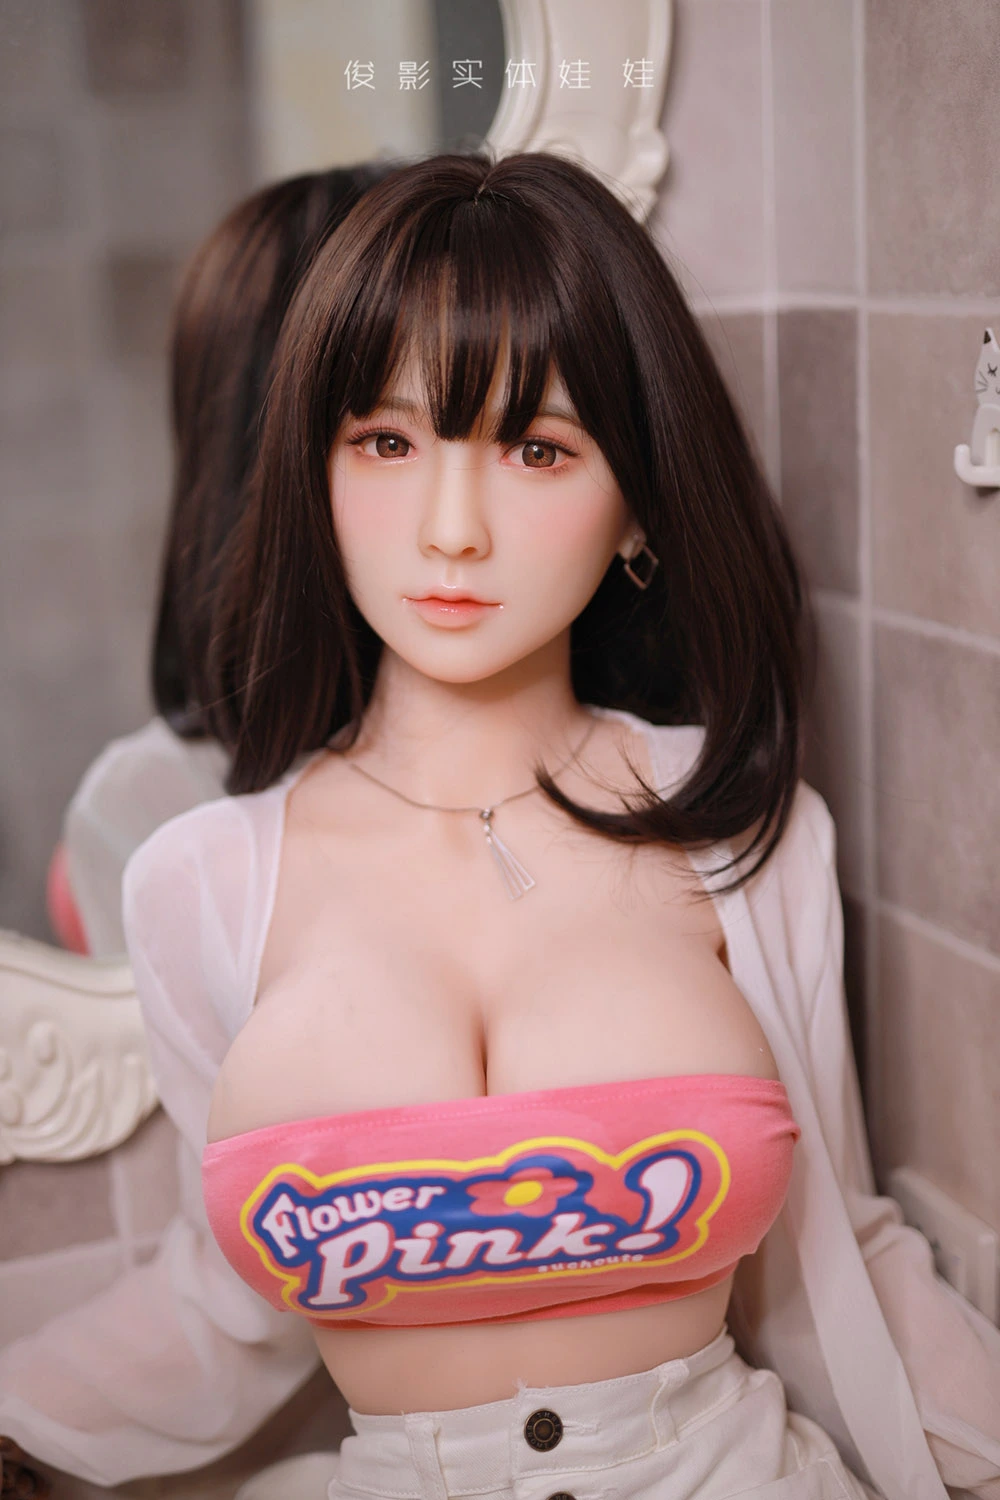 161cm Well-proportioned Seductive Young Virgin Sex Doll Ting Yi